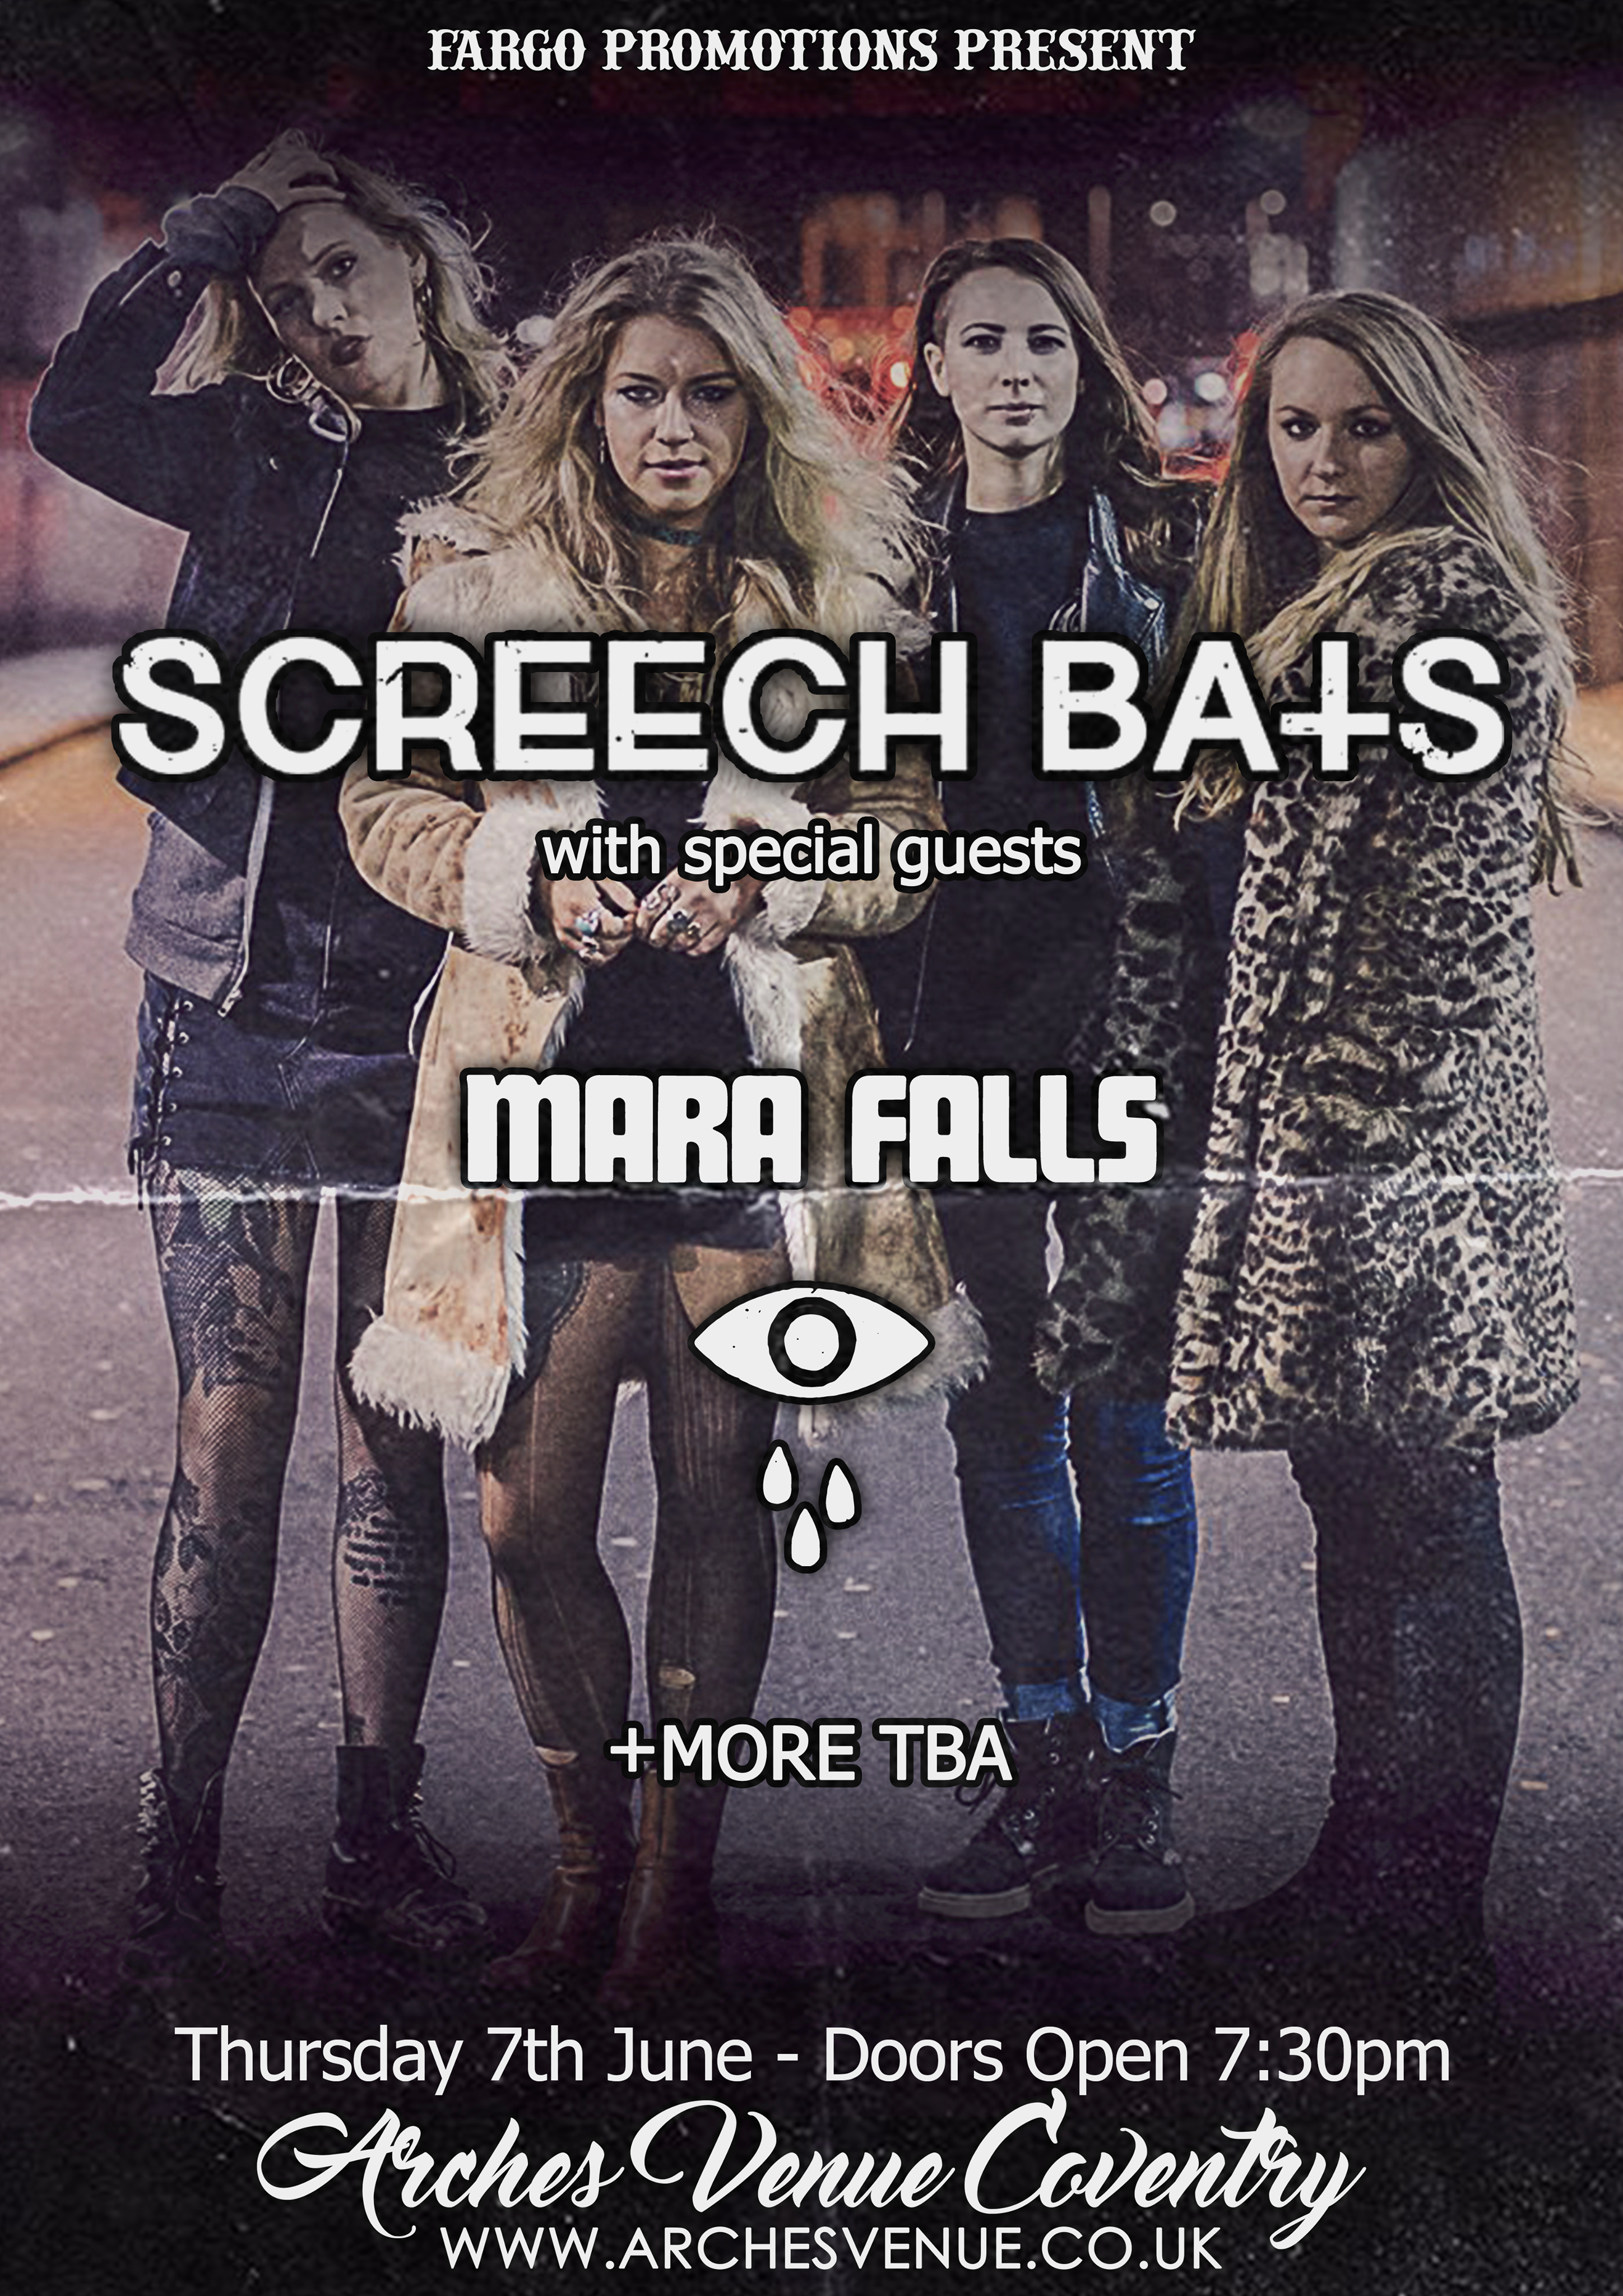  Mara Falls support Screech Bats @ The Arches, Coventry - 07th June 2018